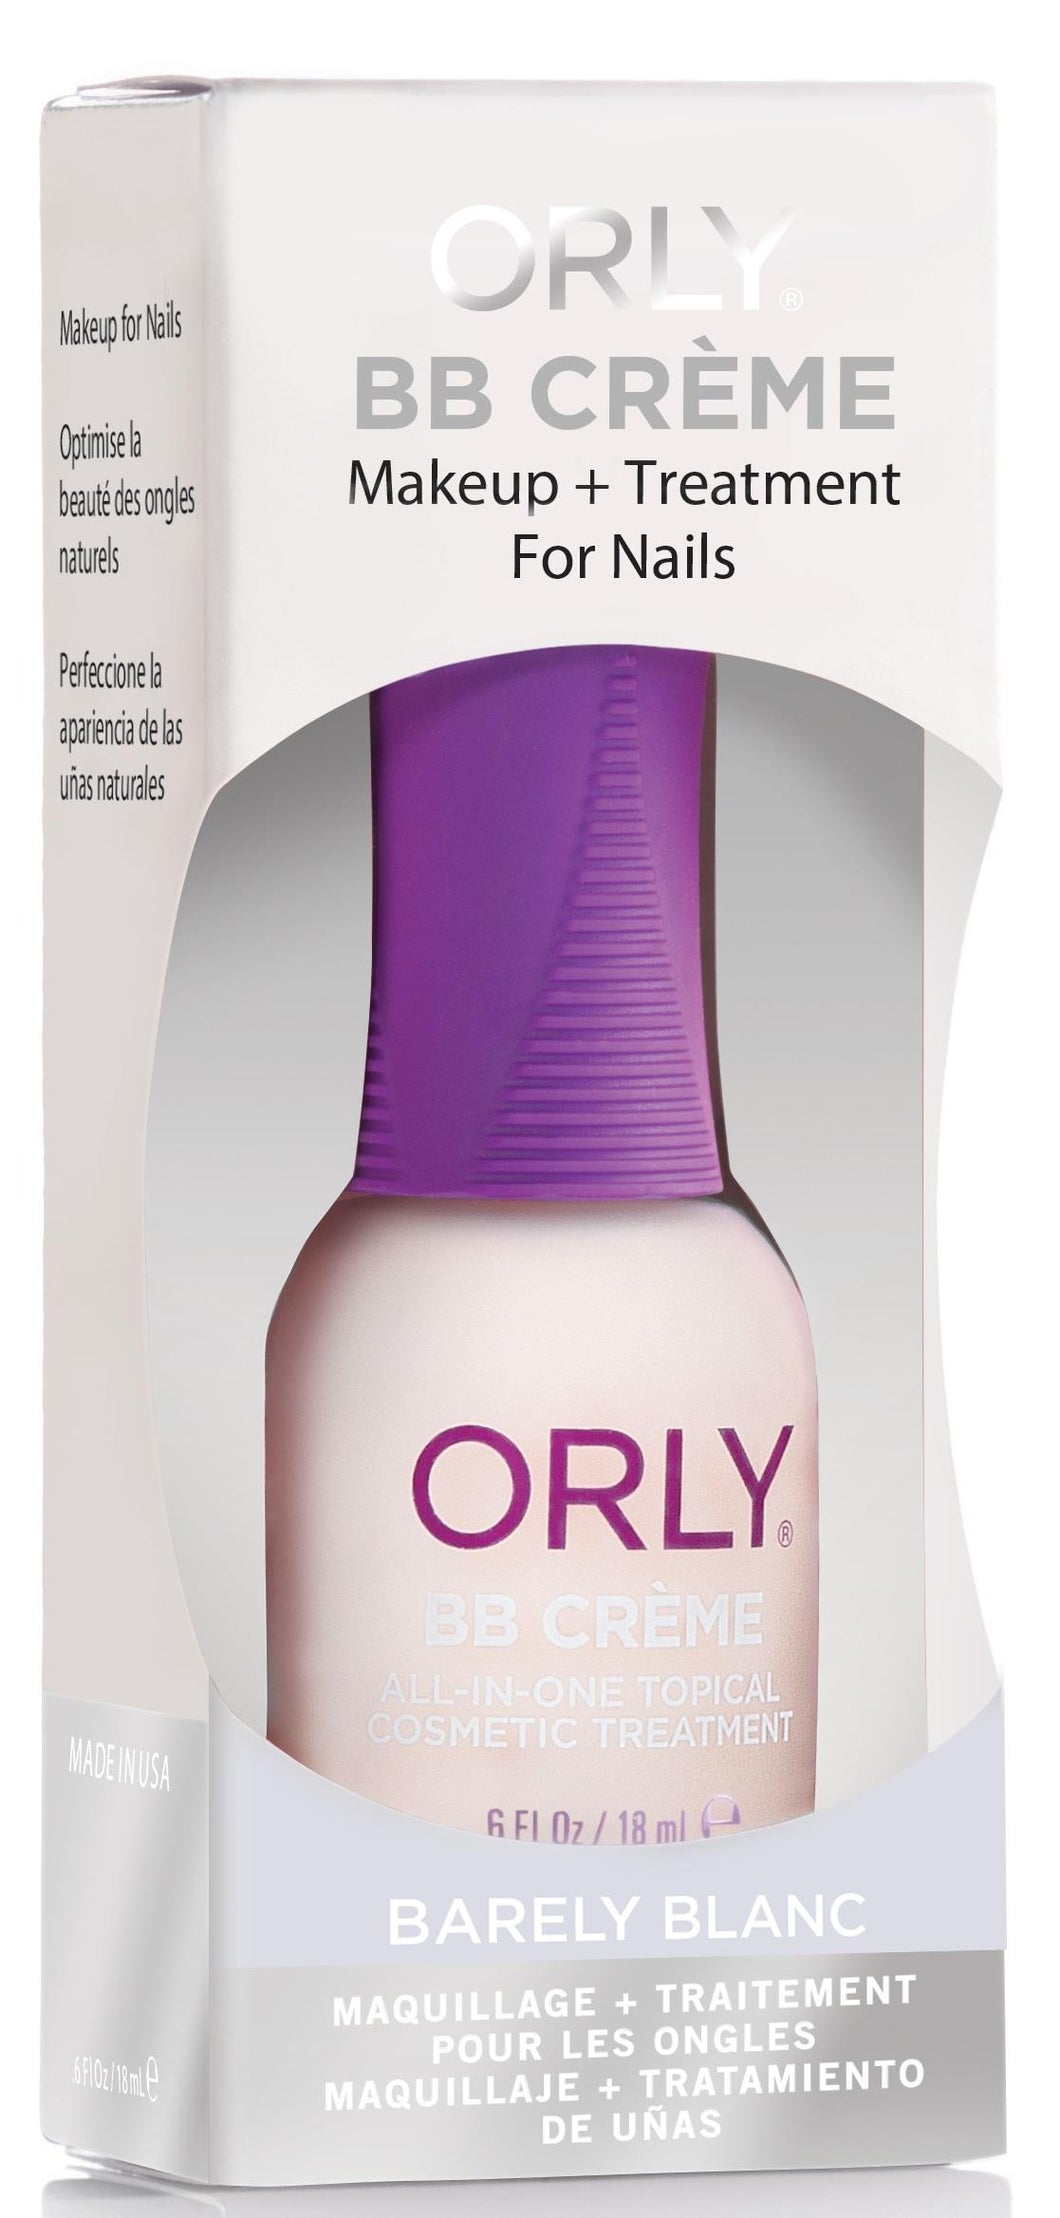 Orly BB Creme Makeup + Treatment for Nails